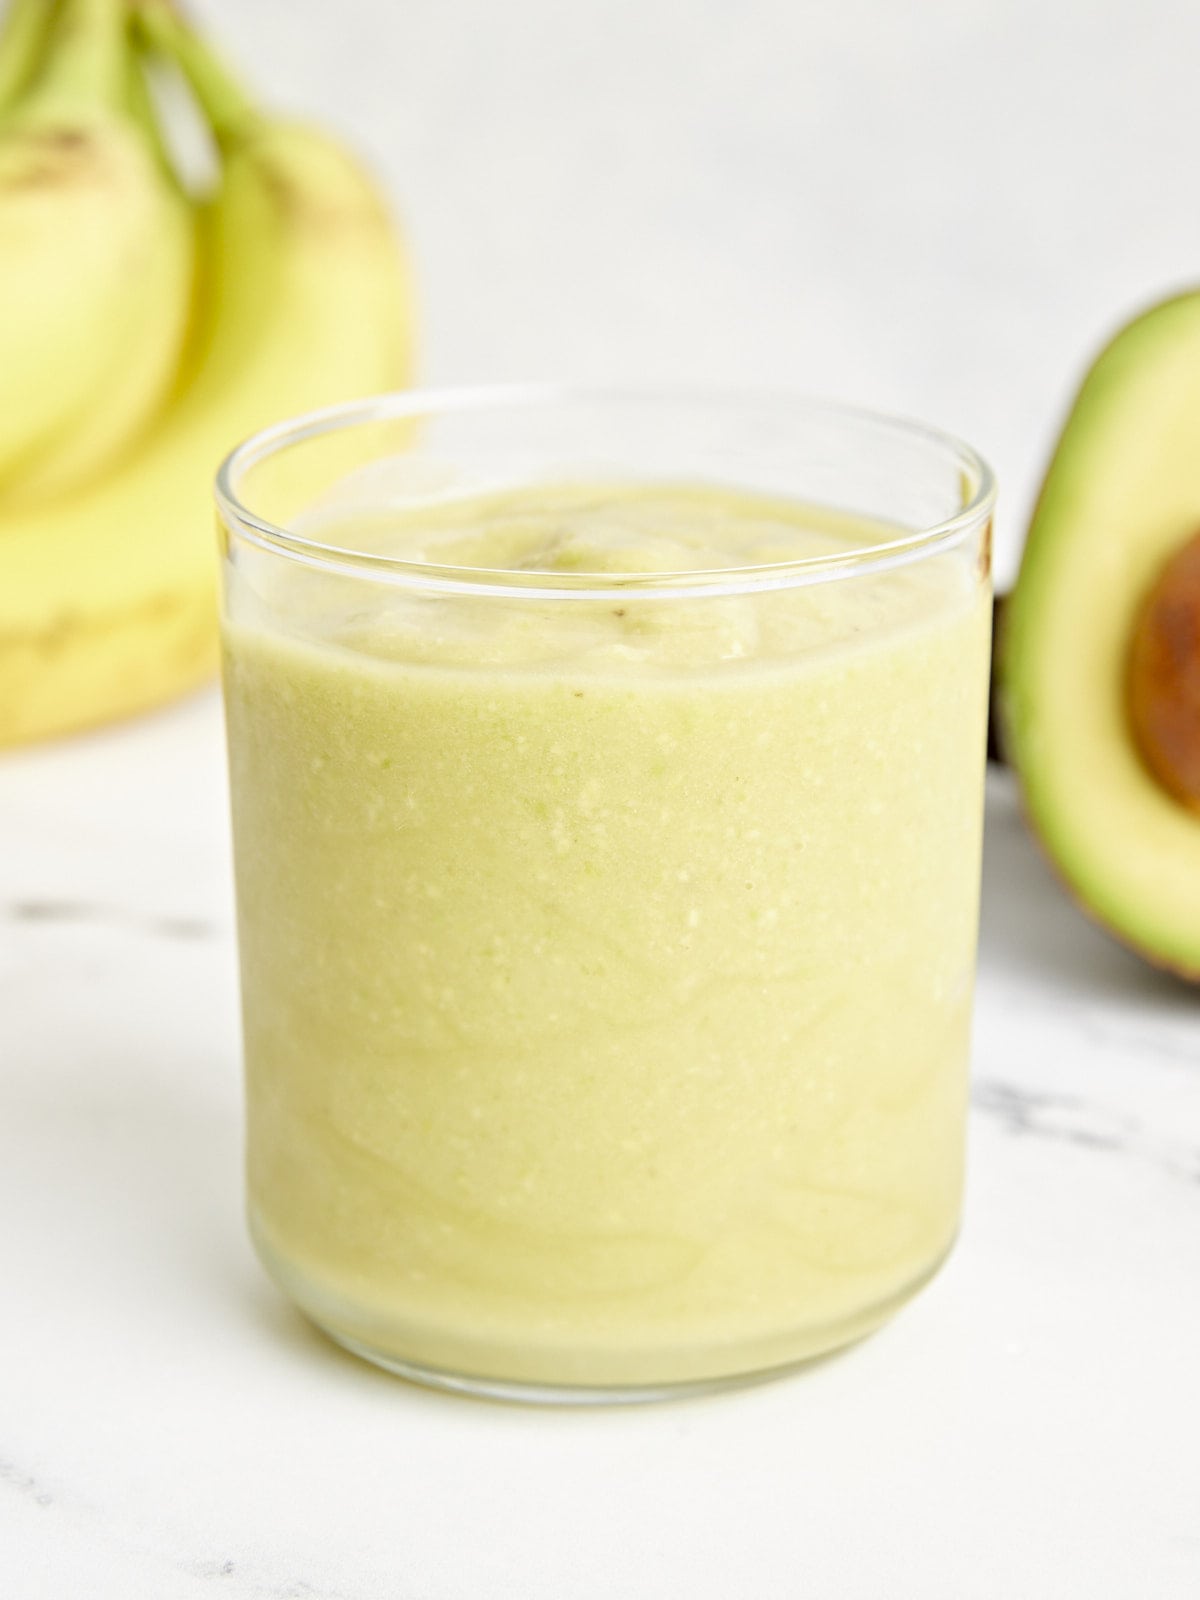 close up of an avocado smoothie in a green glass.